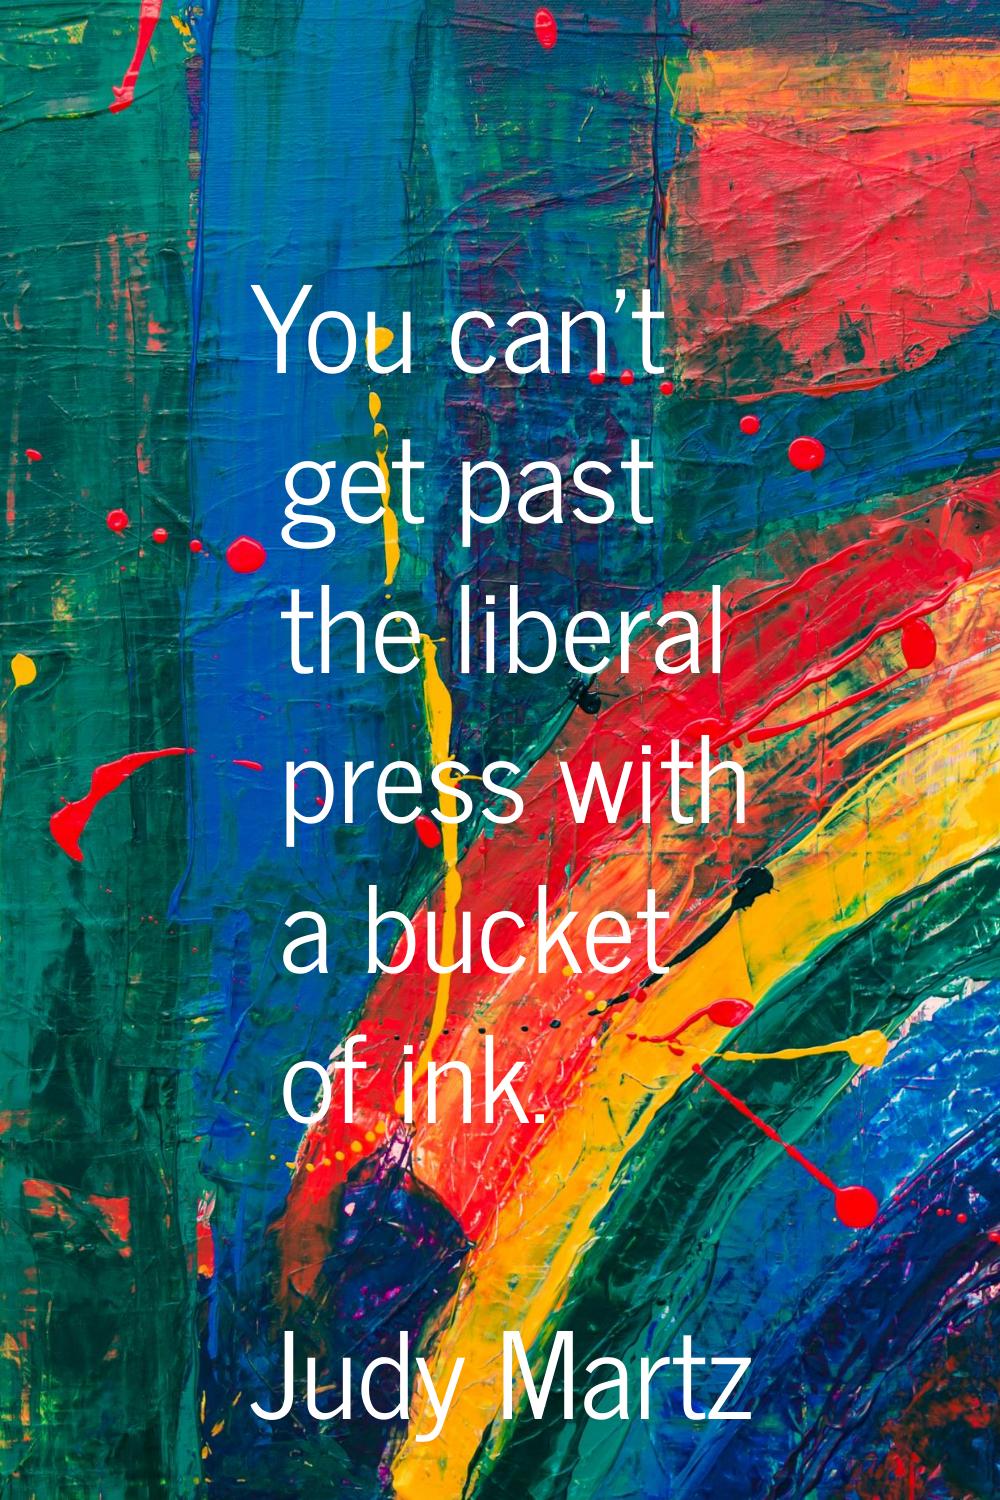 You can't get past the liberal press with a bucket of ink.